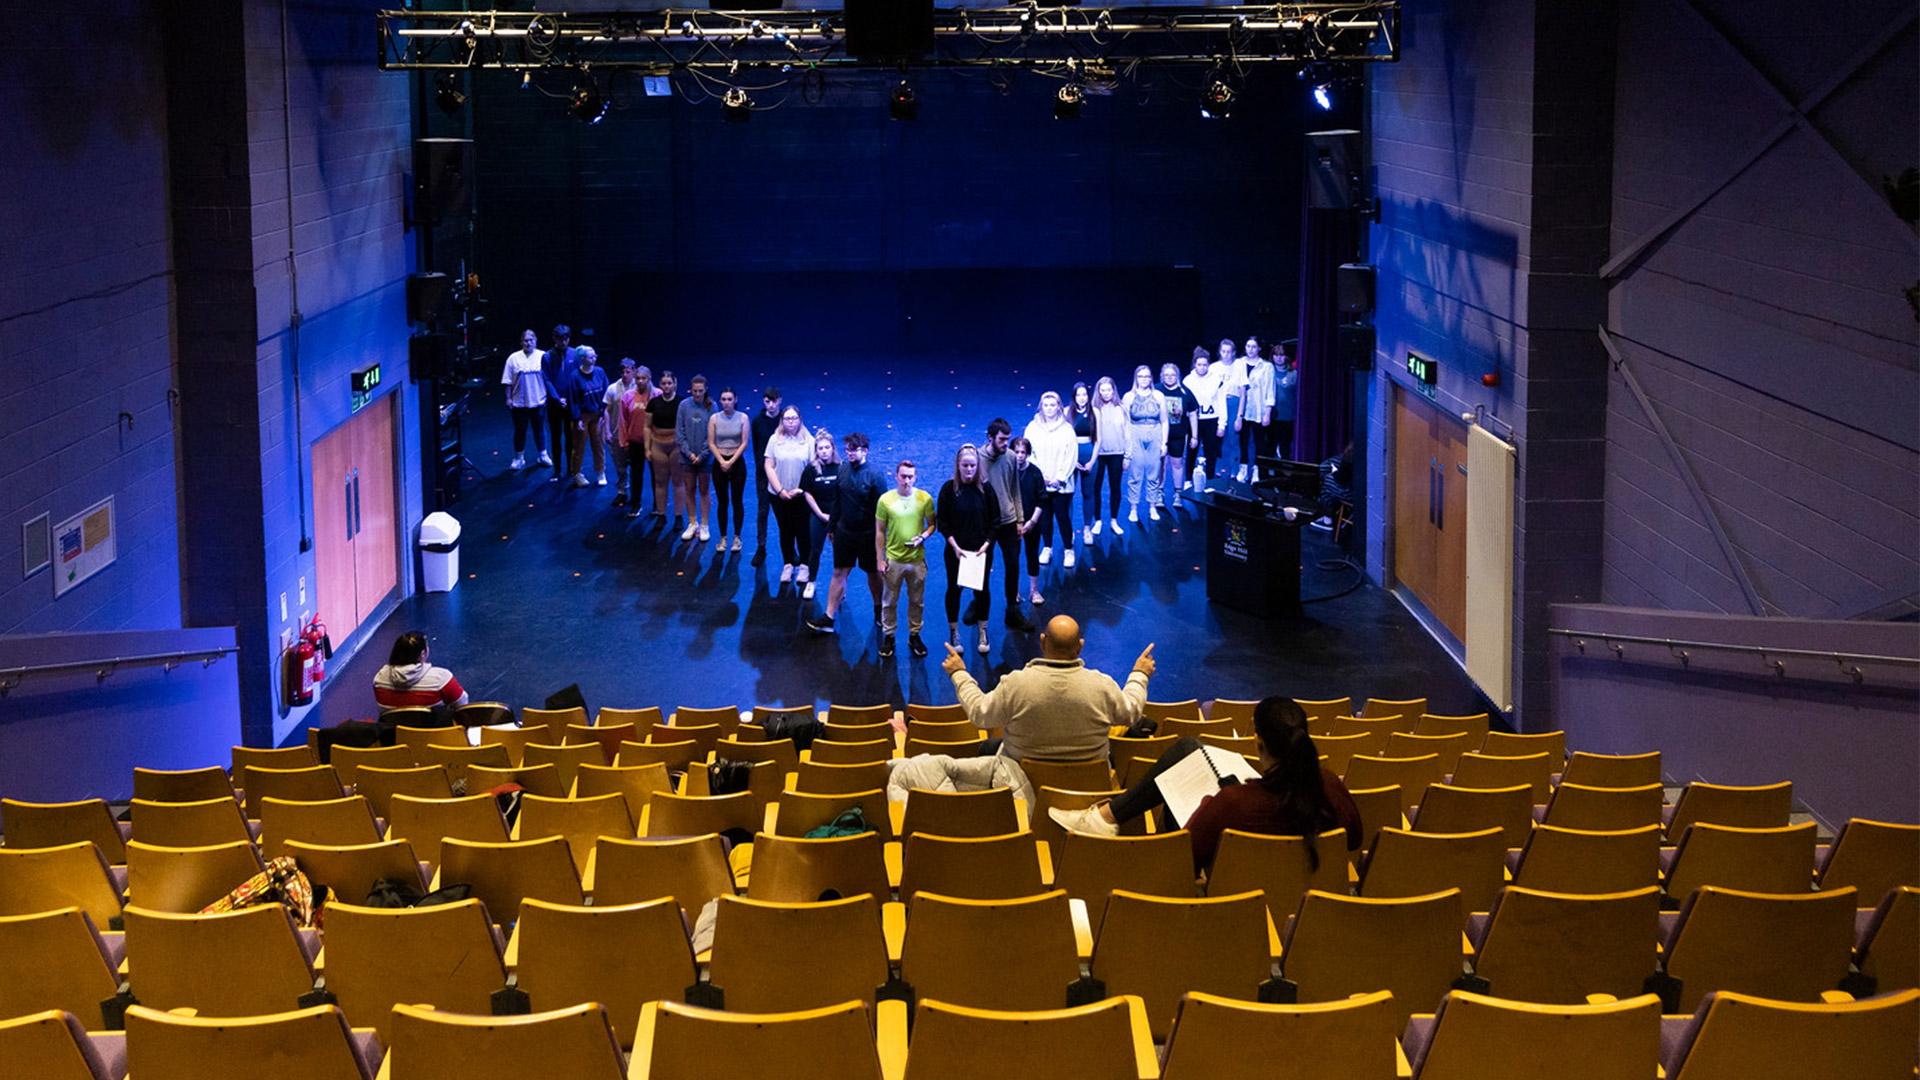 Anempty theatre auditorium with rows of empty seats and students rehearsing on stage